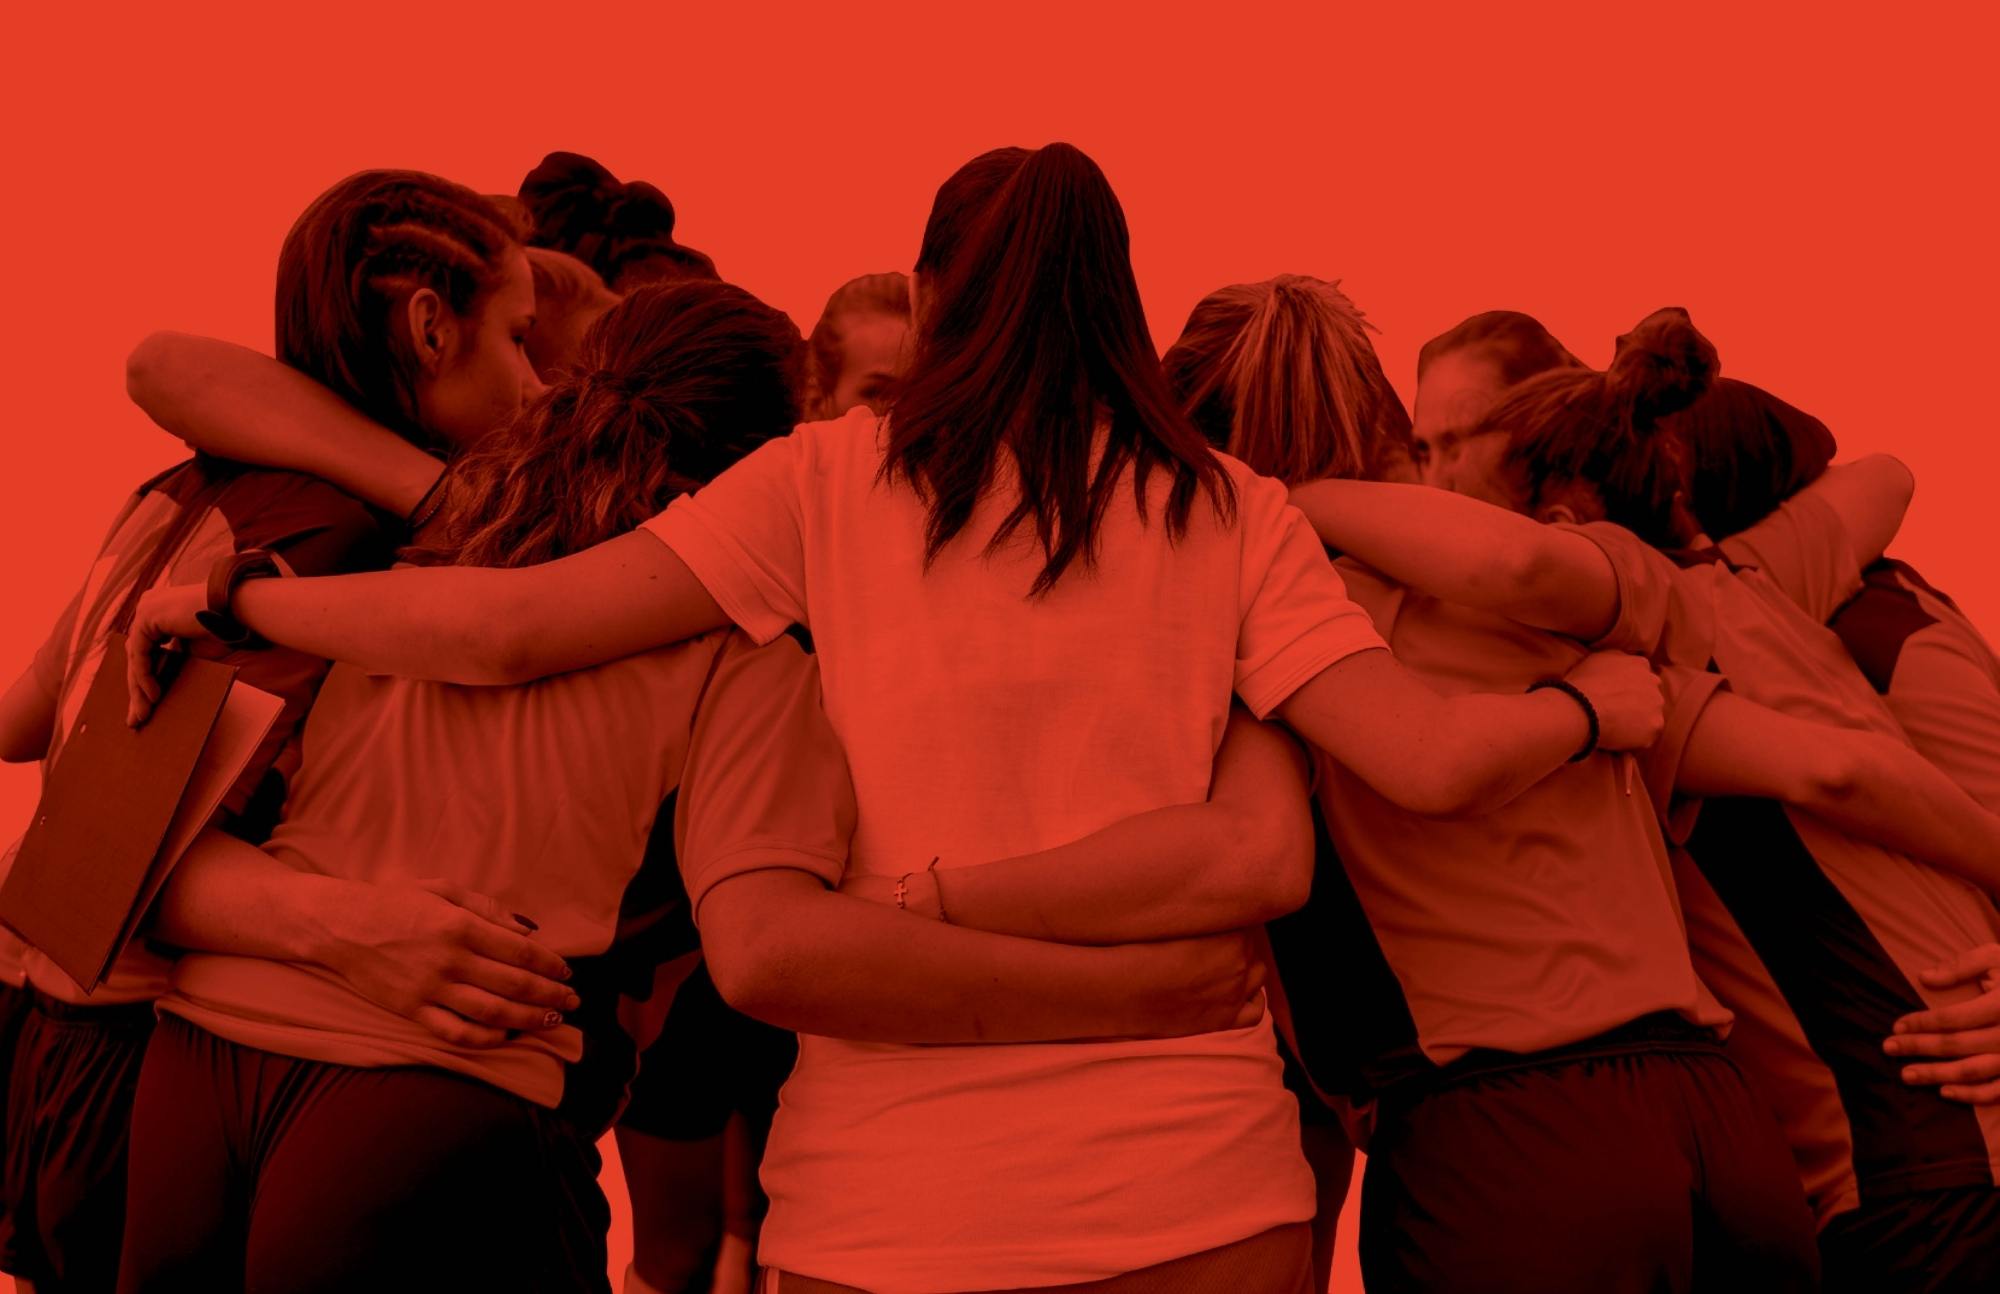 A girls' soccer team huddles up with their backs to the viewer